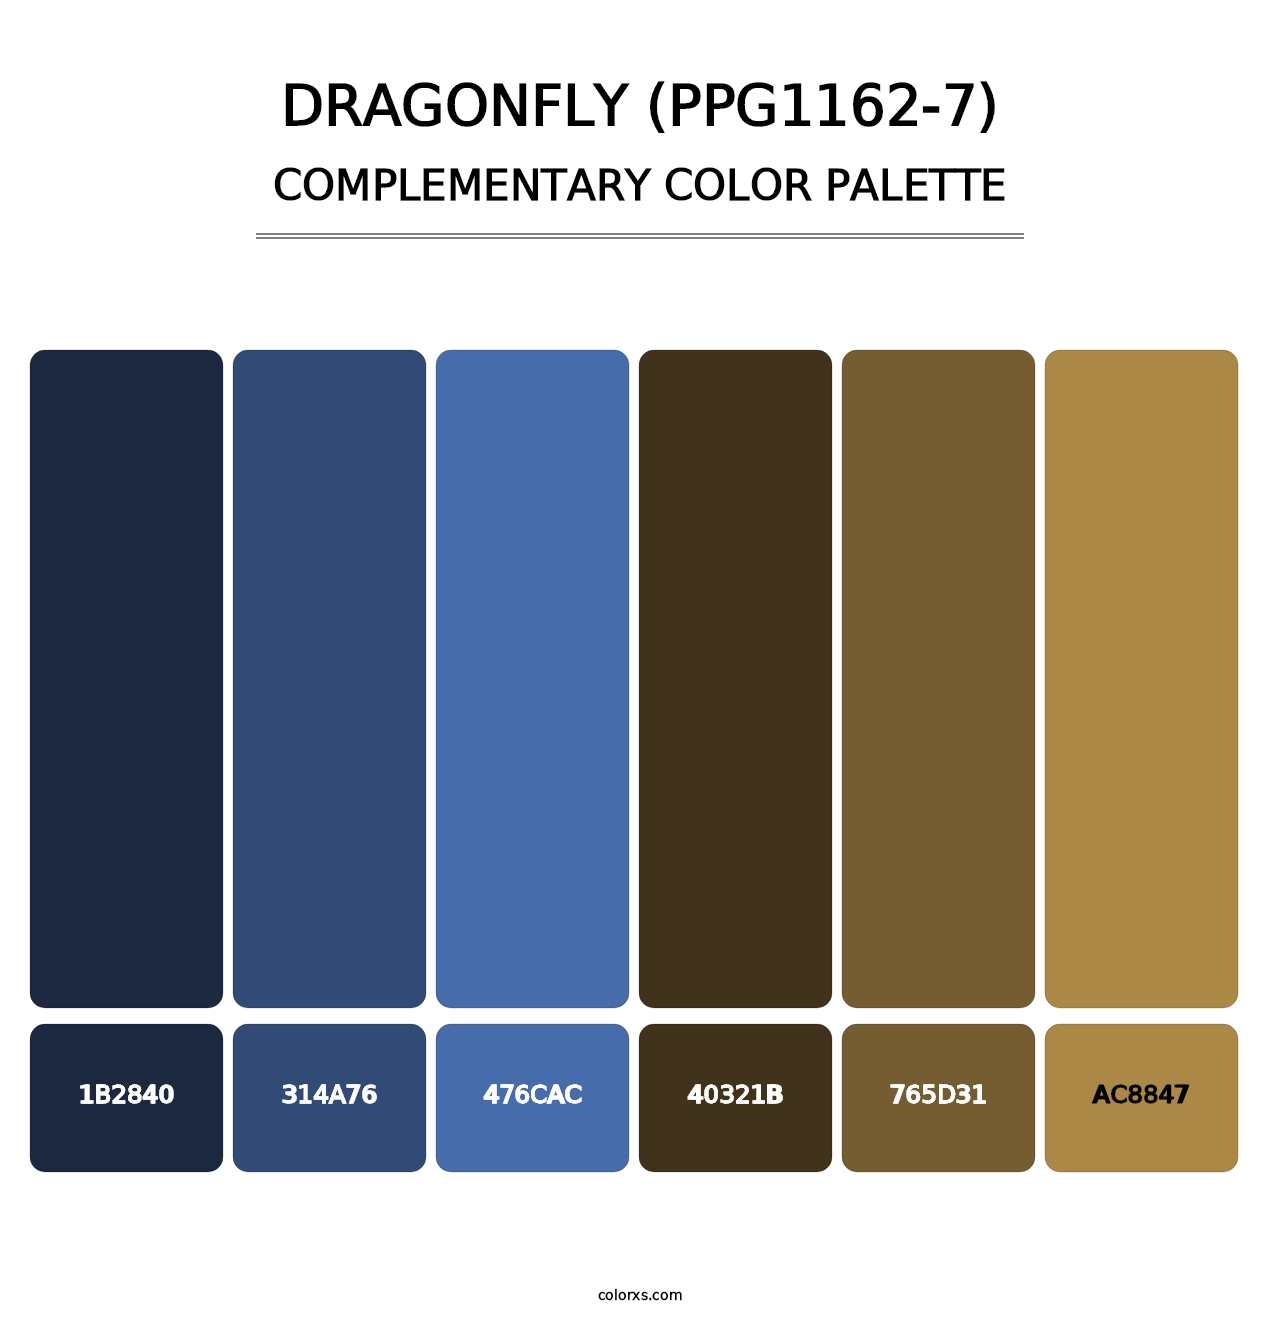 Dragonfly (PPG1162-7) - Complementary Color Palette